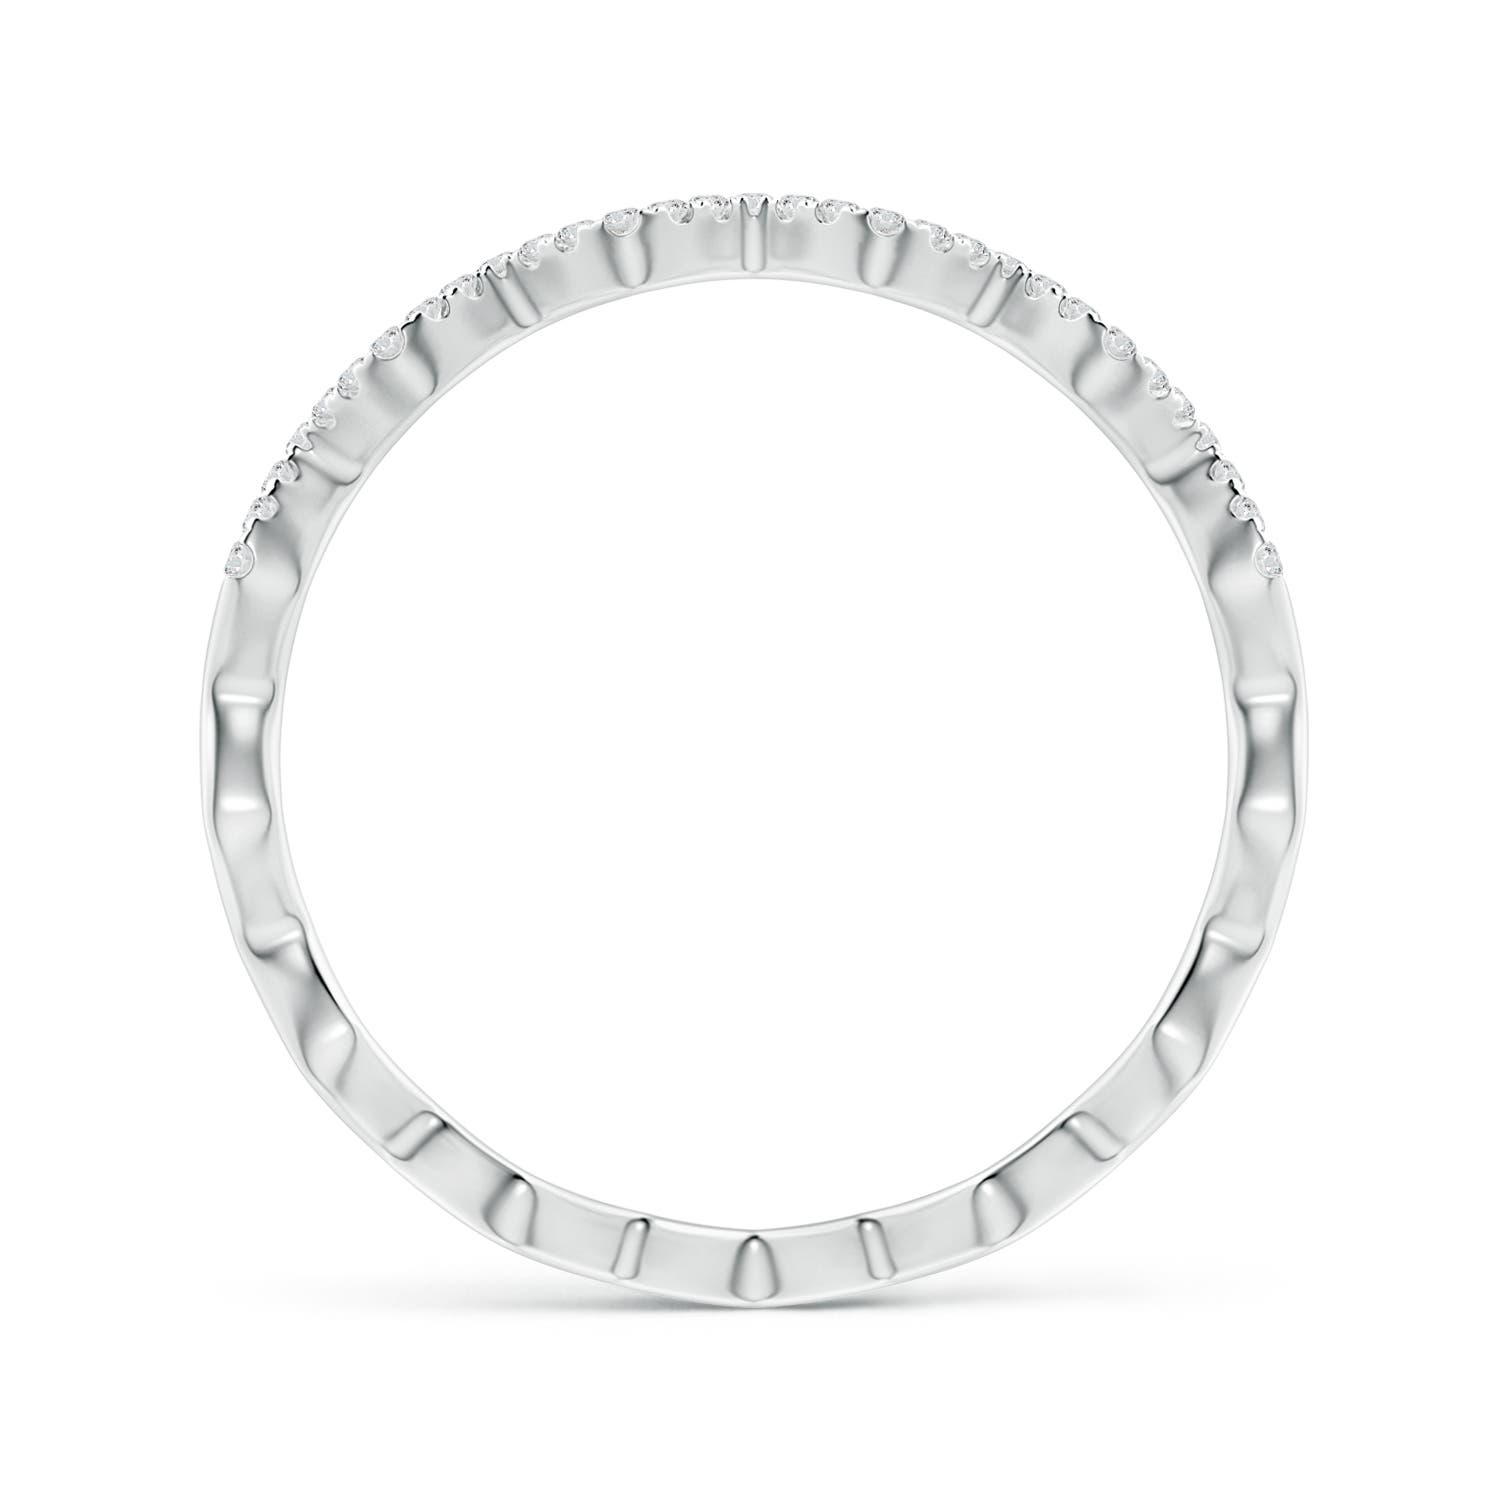 H, SI2 / 0.19 CT / 14 KT White Gold